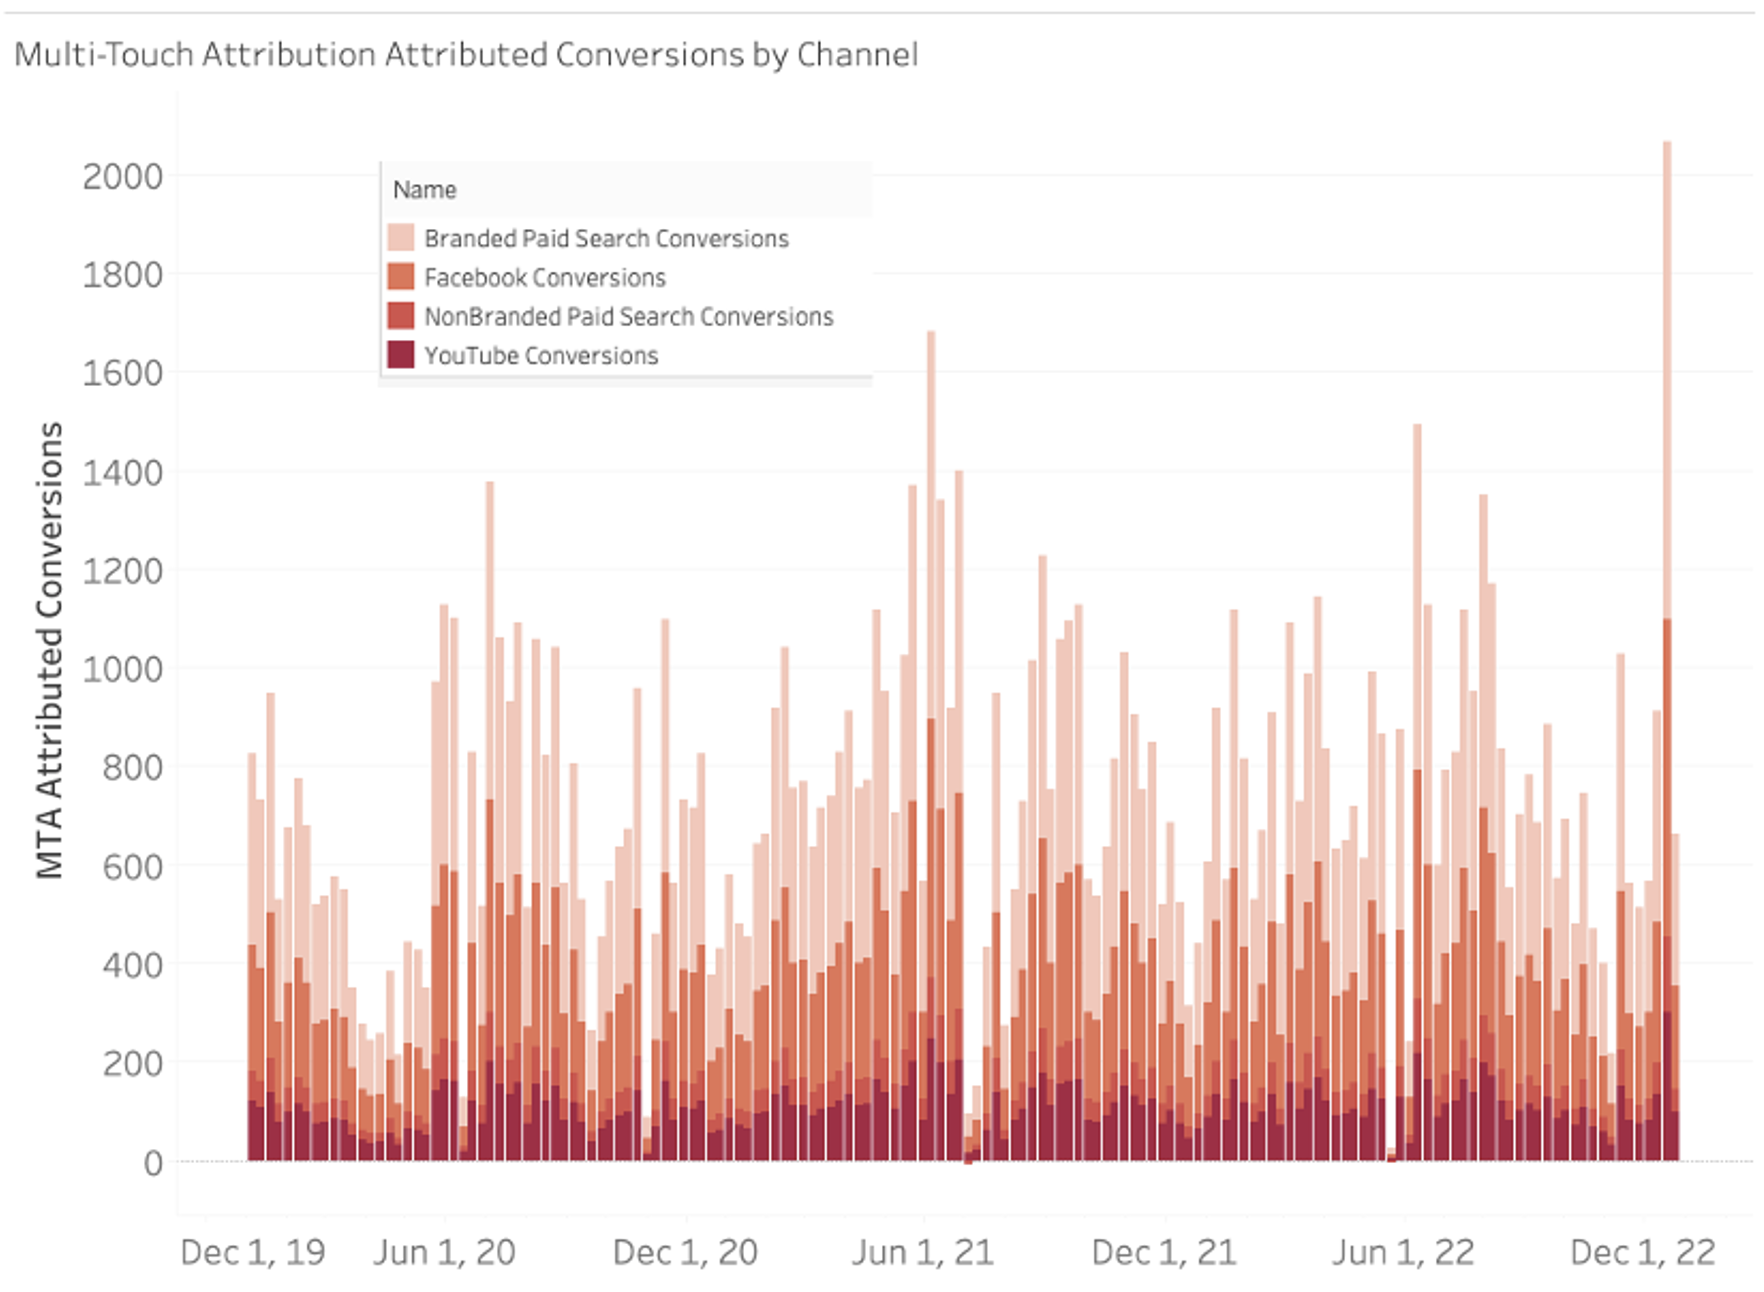 Figure 4: Multi-Touch Attribution predicted conversions by channel